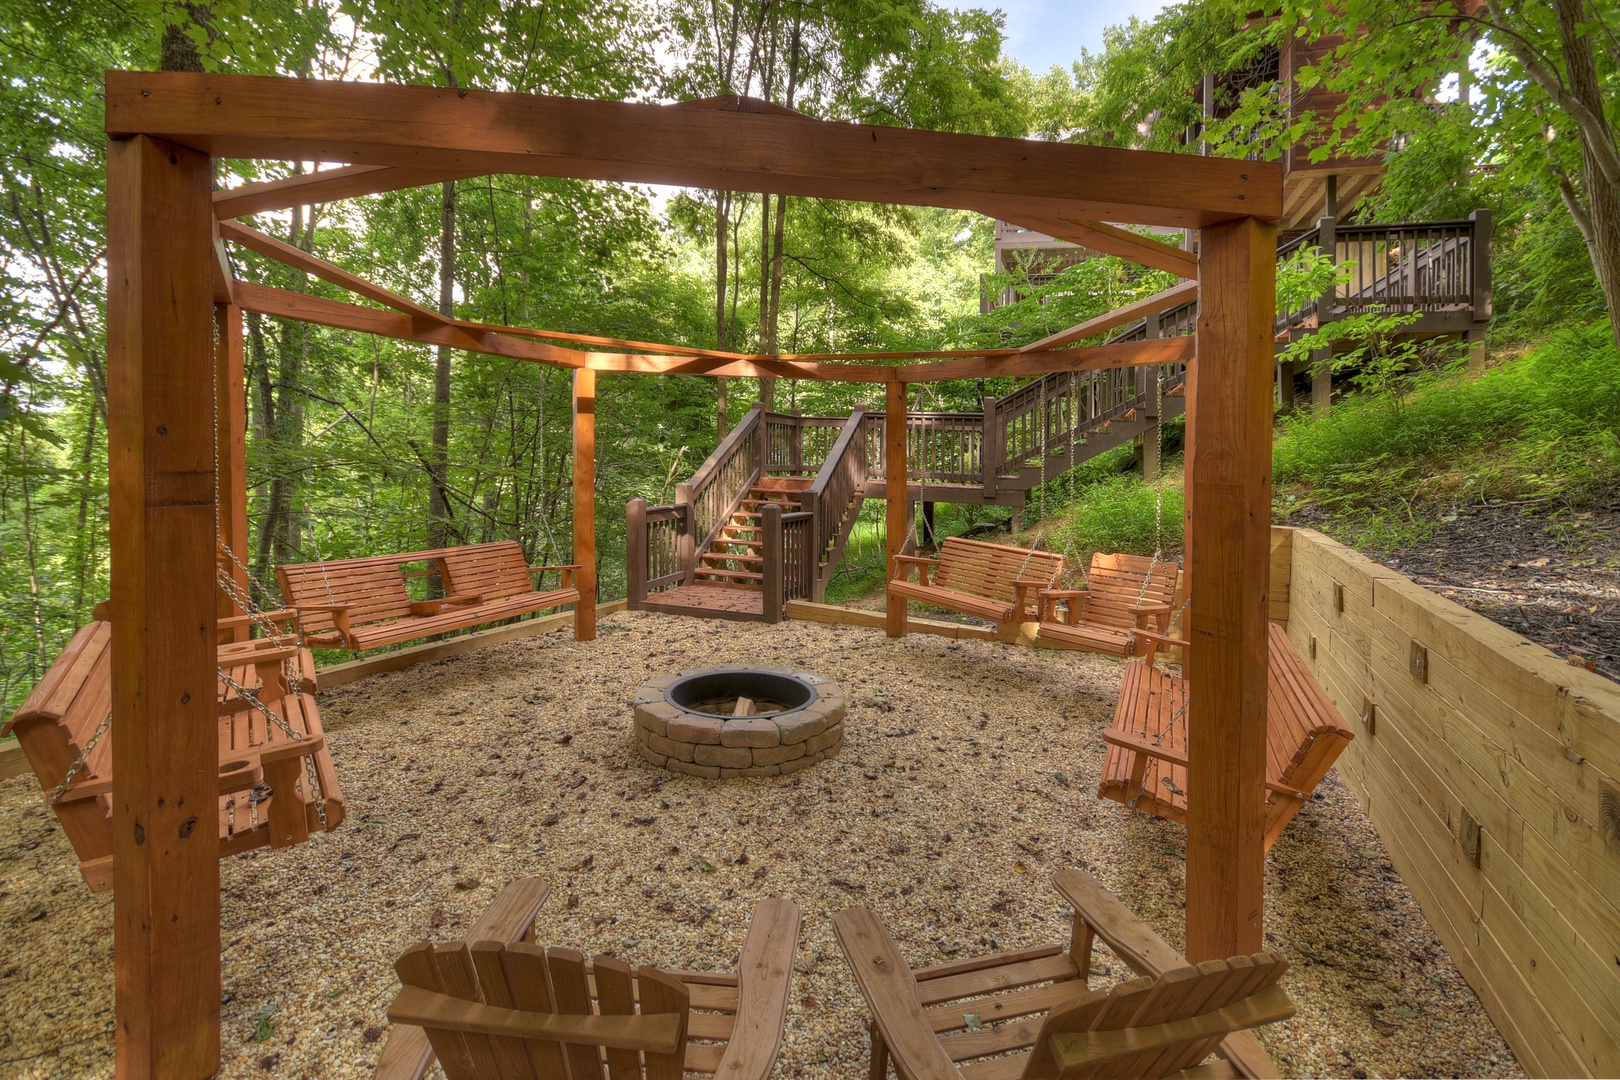 Hemptown Heights- Full view of the firepit and outdoor seating